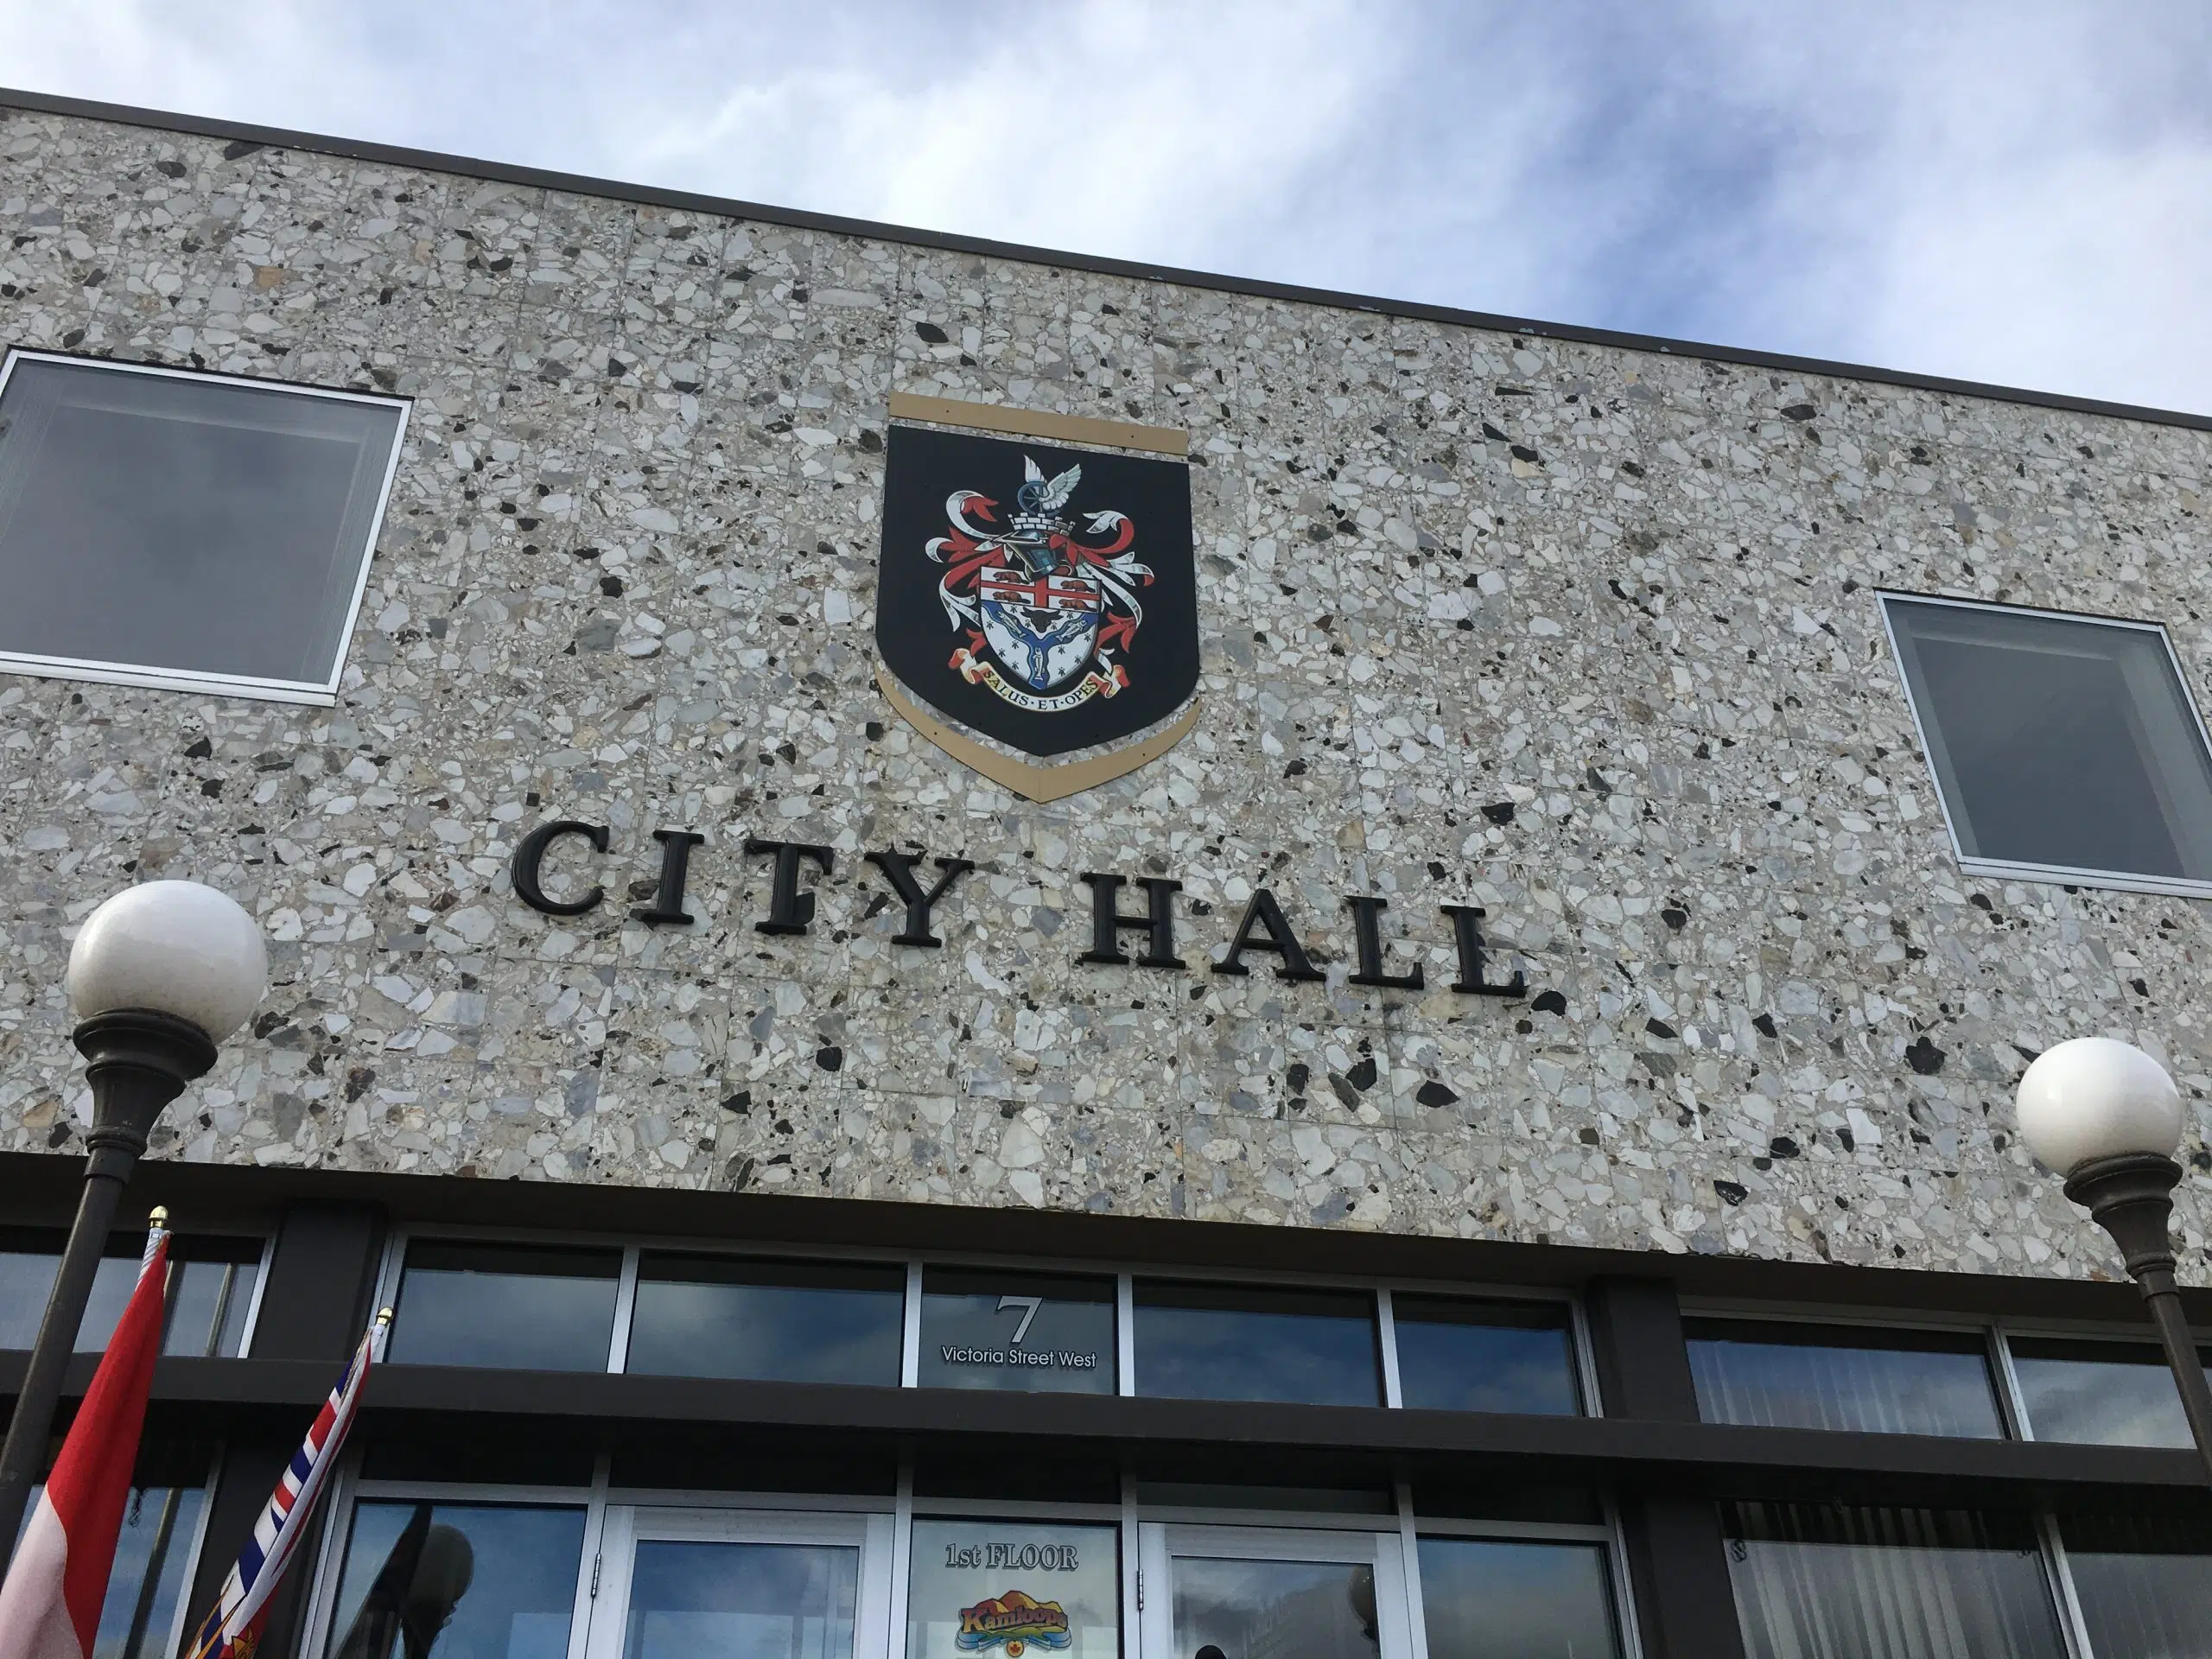 Kamloops Council voted unanimously to allow a First Nations organization to increase the number of affordable housing units